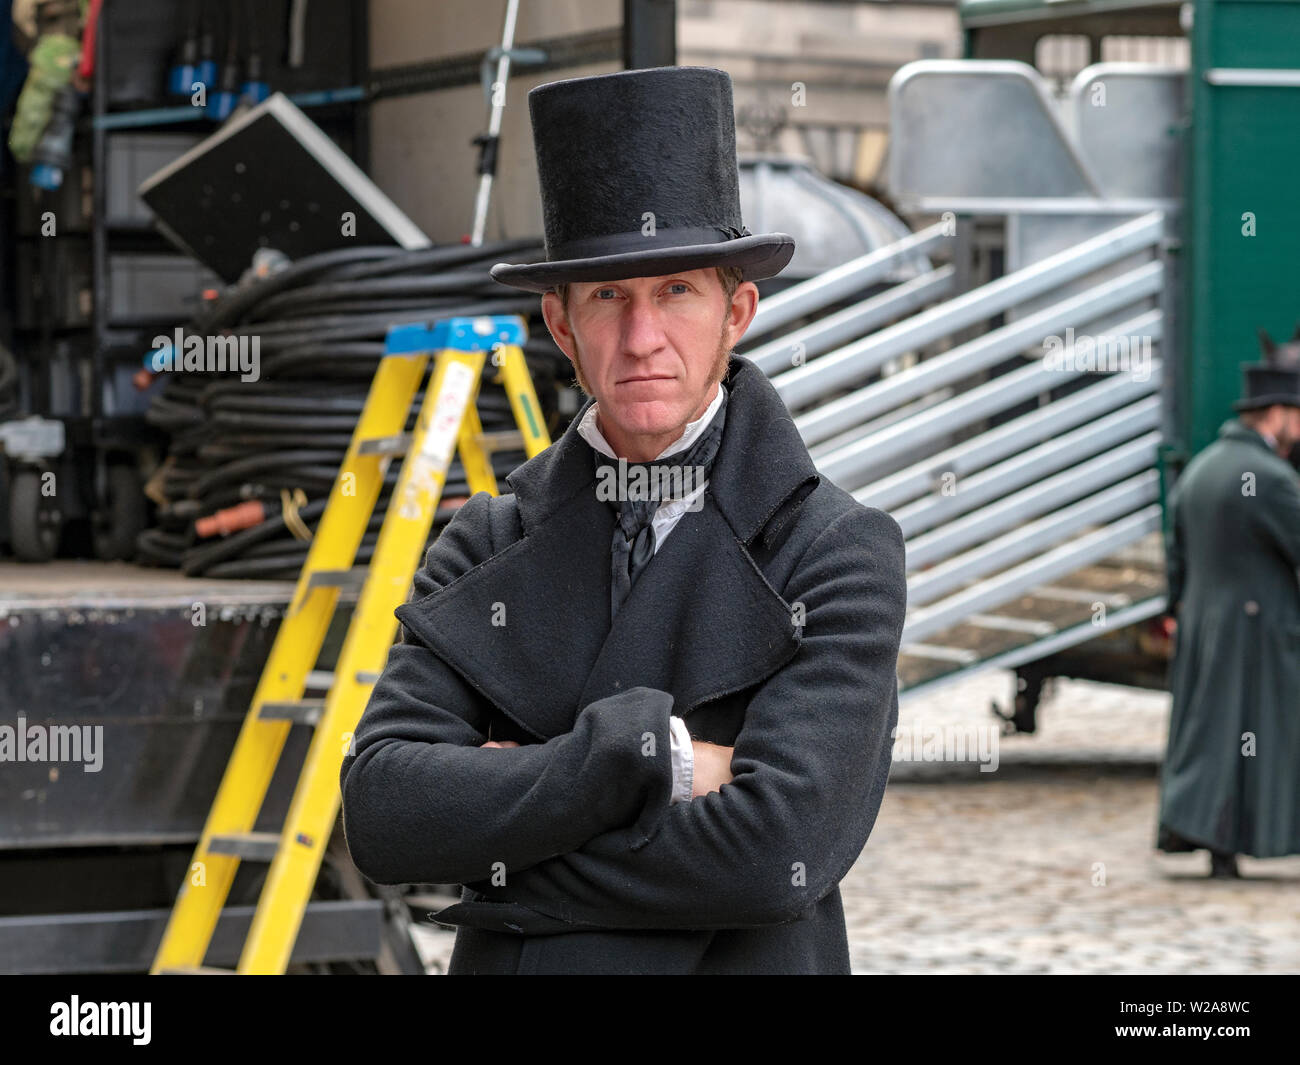 Filming in Edinburgh of Belgravia, an upcoming ITV historical period drama television series based on the novel of the same by Julian Fellowes. Stock Photo